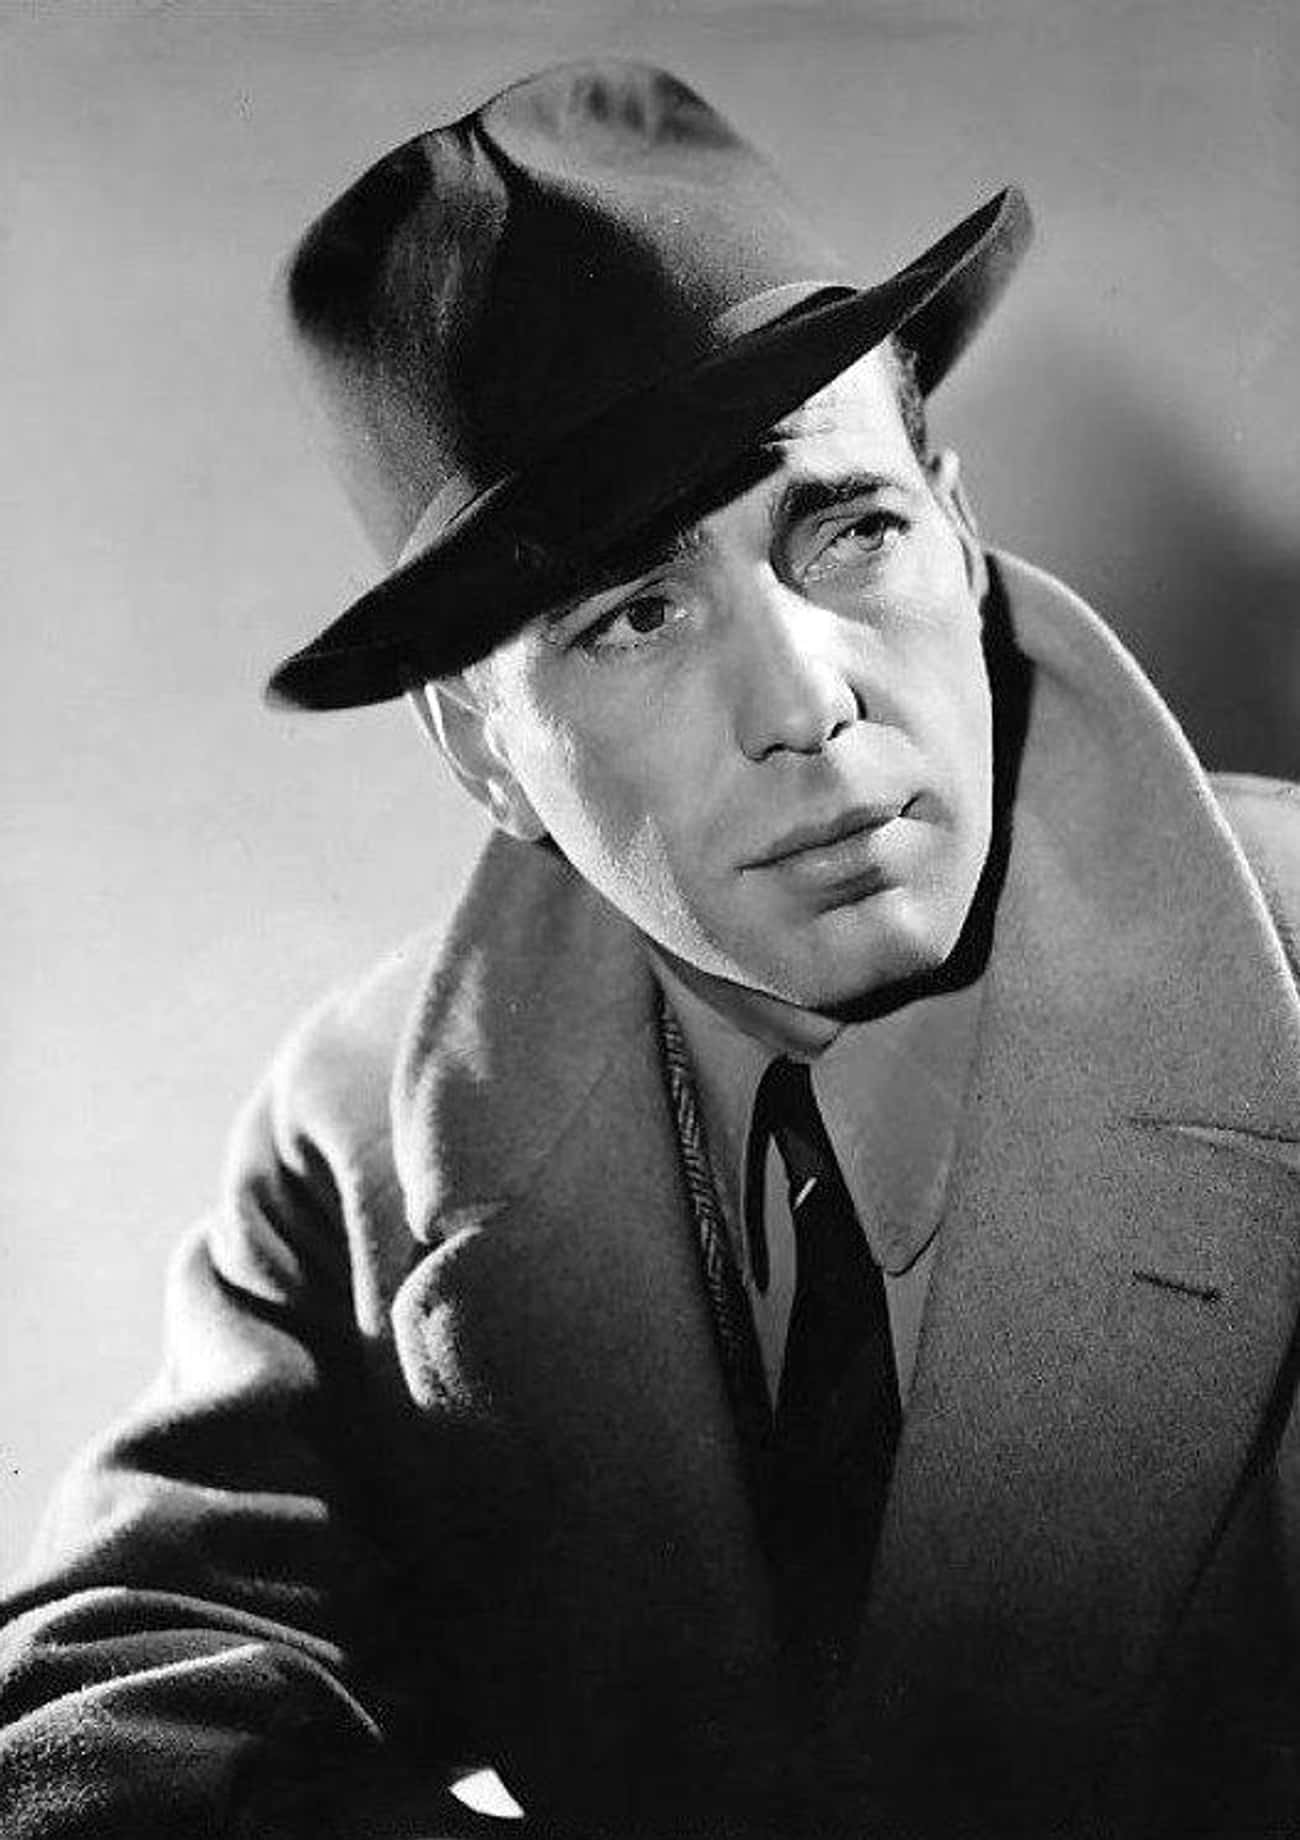 Humphrey Bogart May Have Received His Trademark Scar In A Barroom Brawl